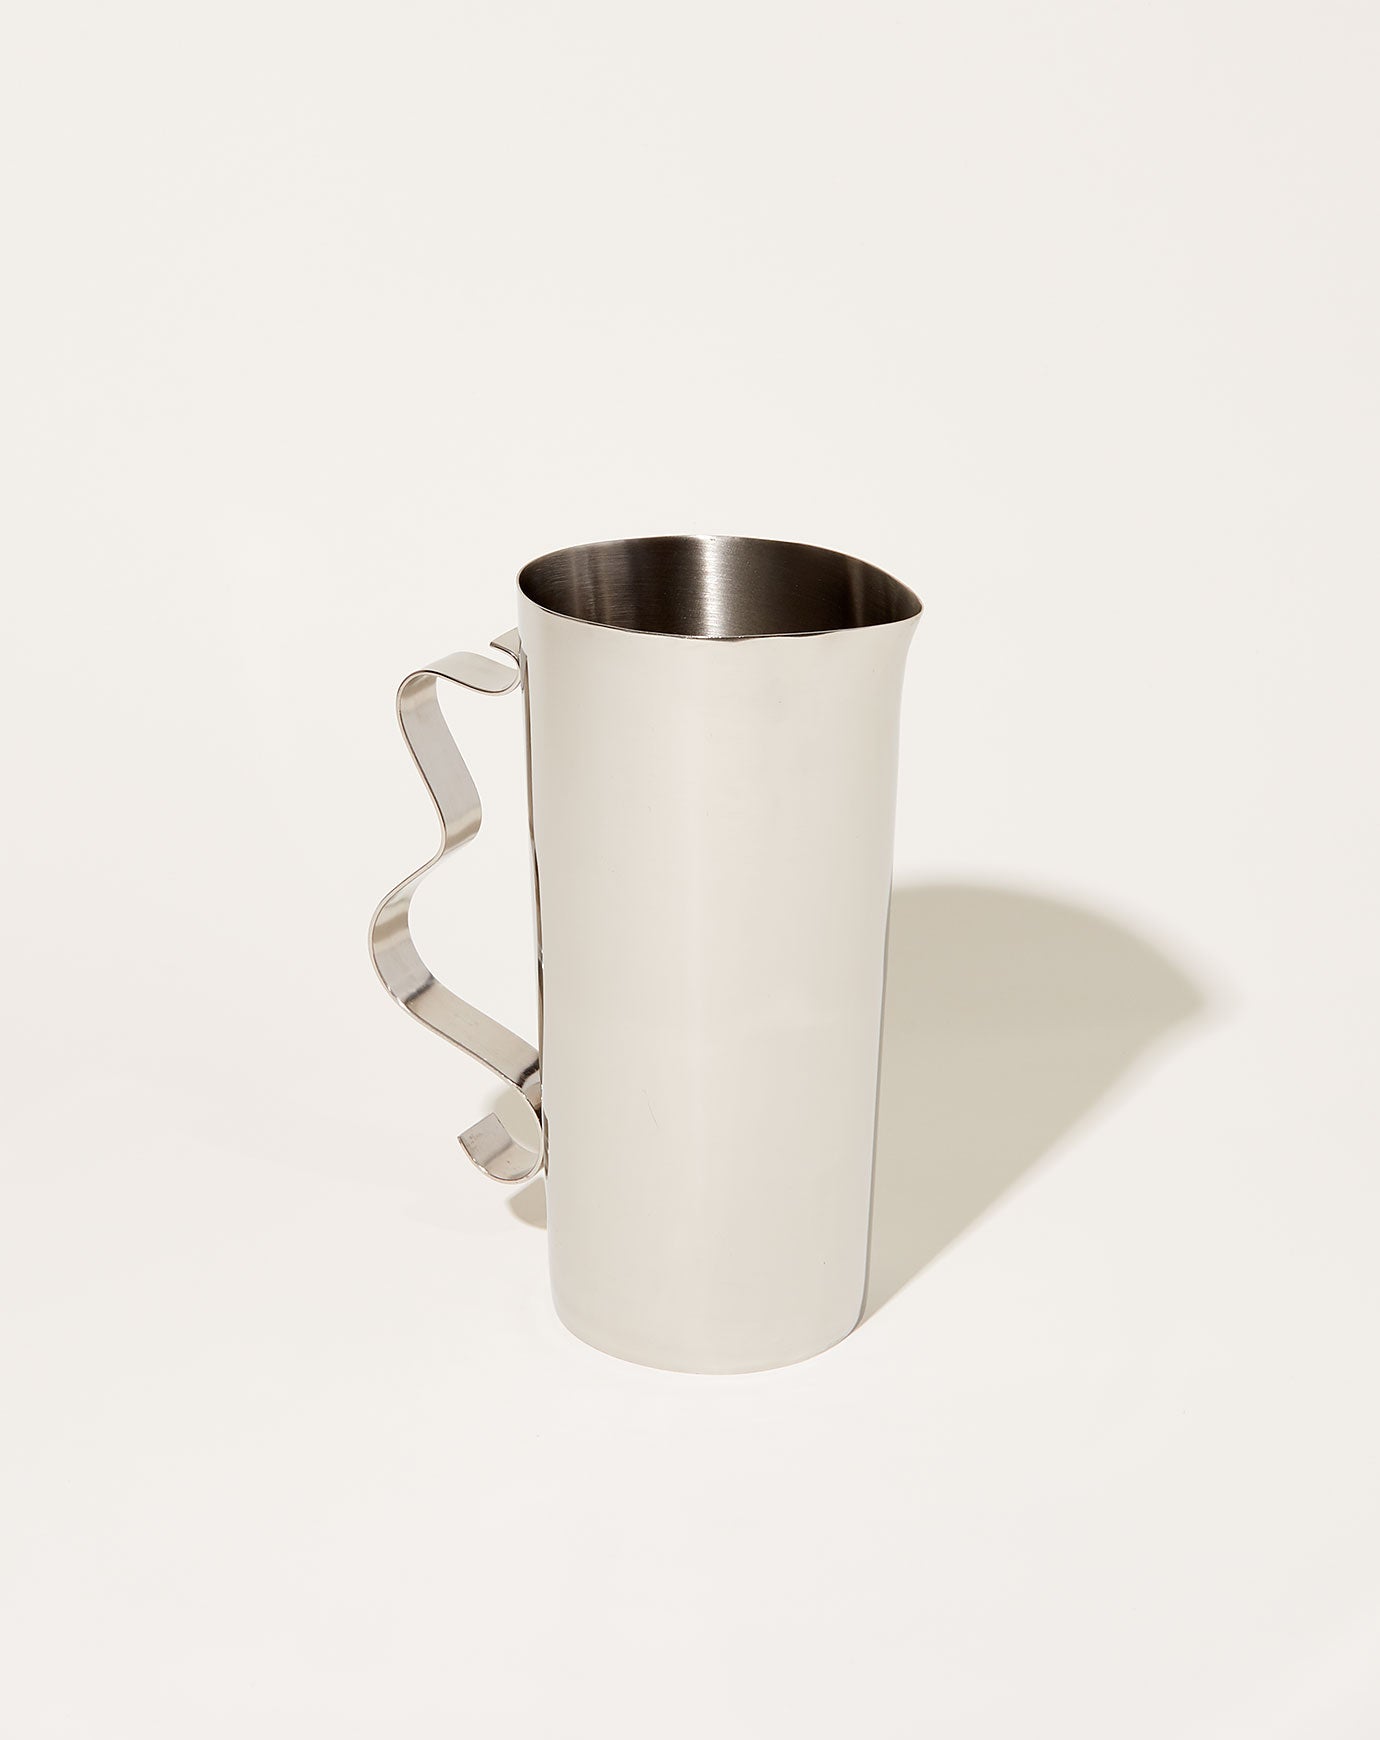 Sophie Lou Jacobsen Squiggle Pitcher in Mirror Polish Stainless Steel